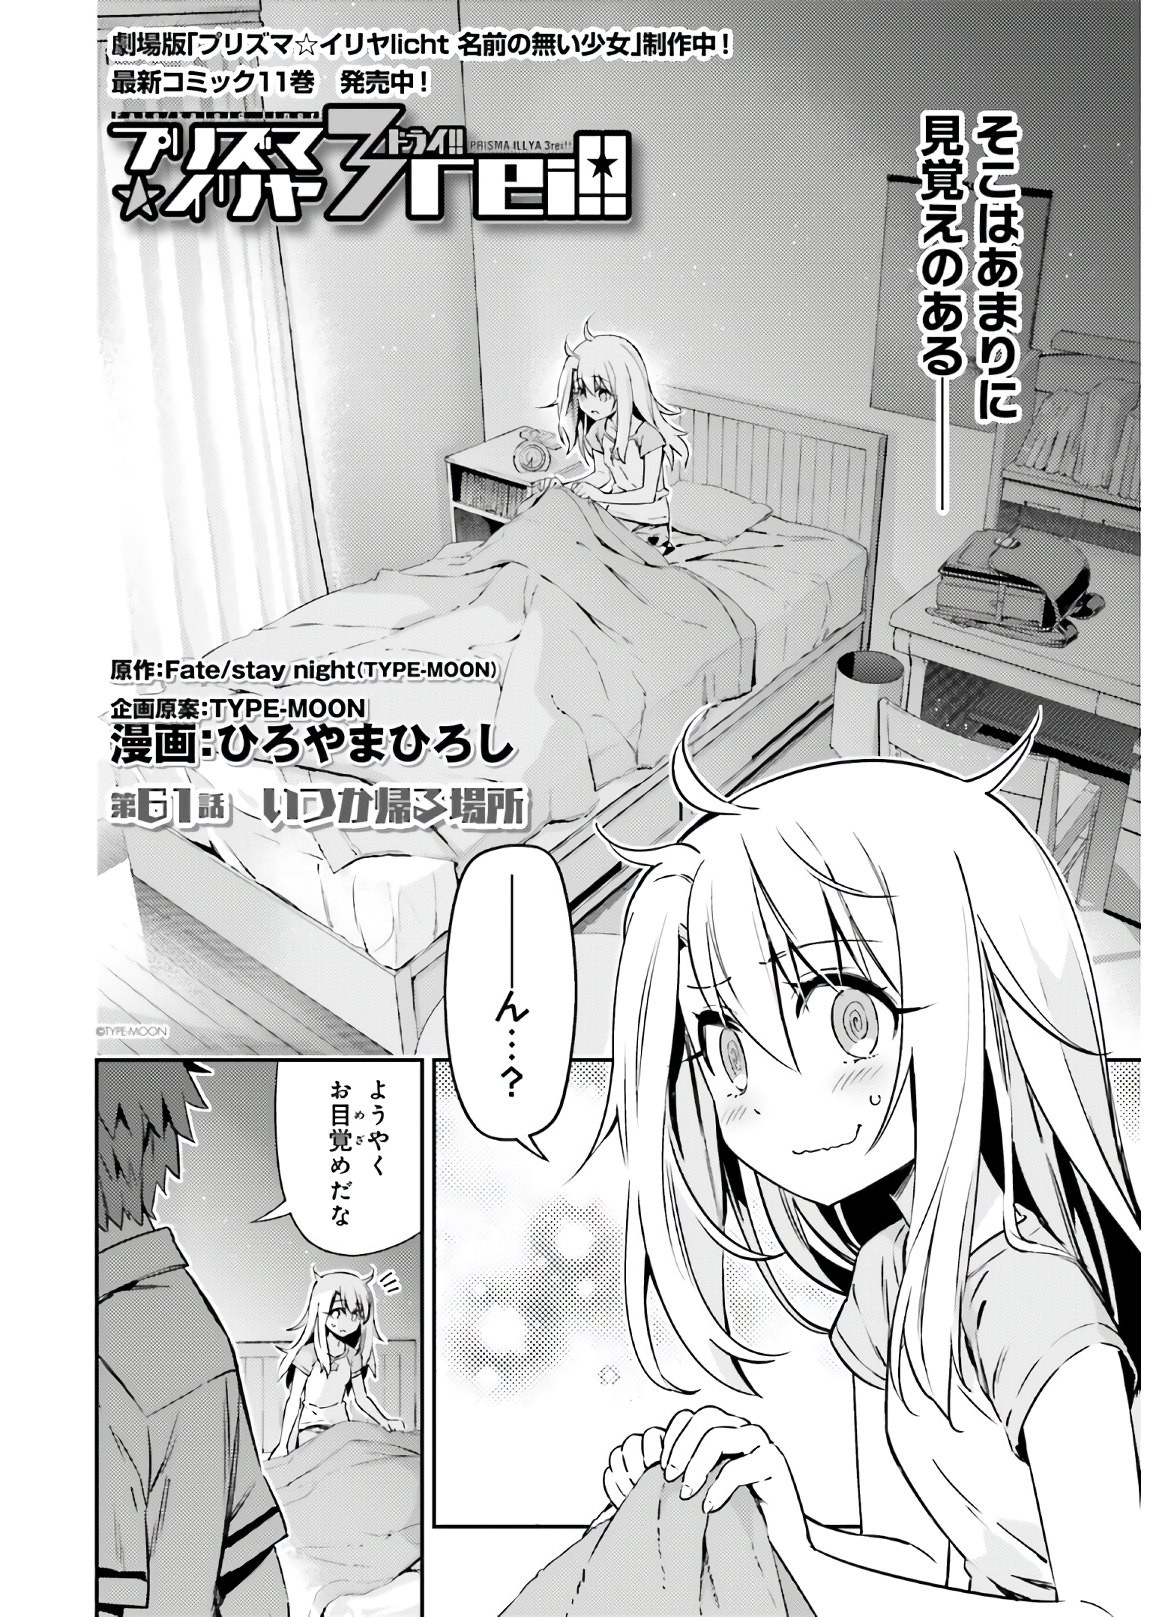 Fate/Kaleid Liner Prisma Illya Drei! - Chapter 61 - Page 2